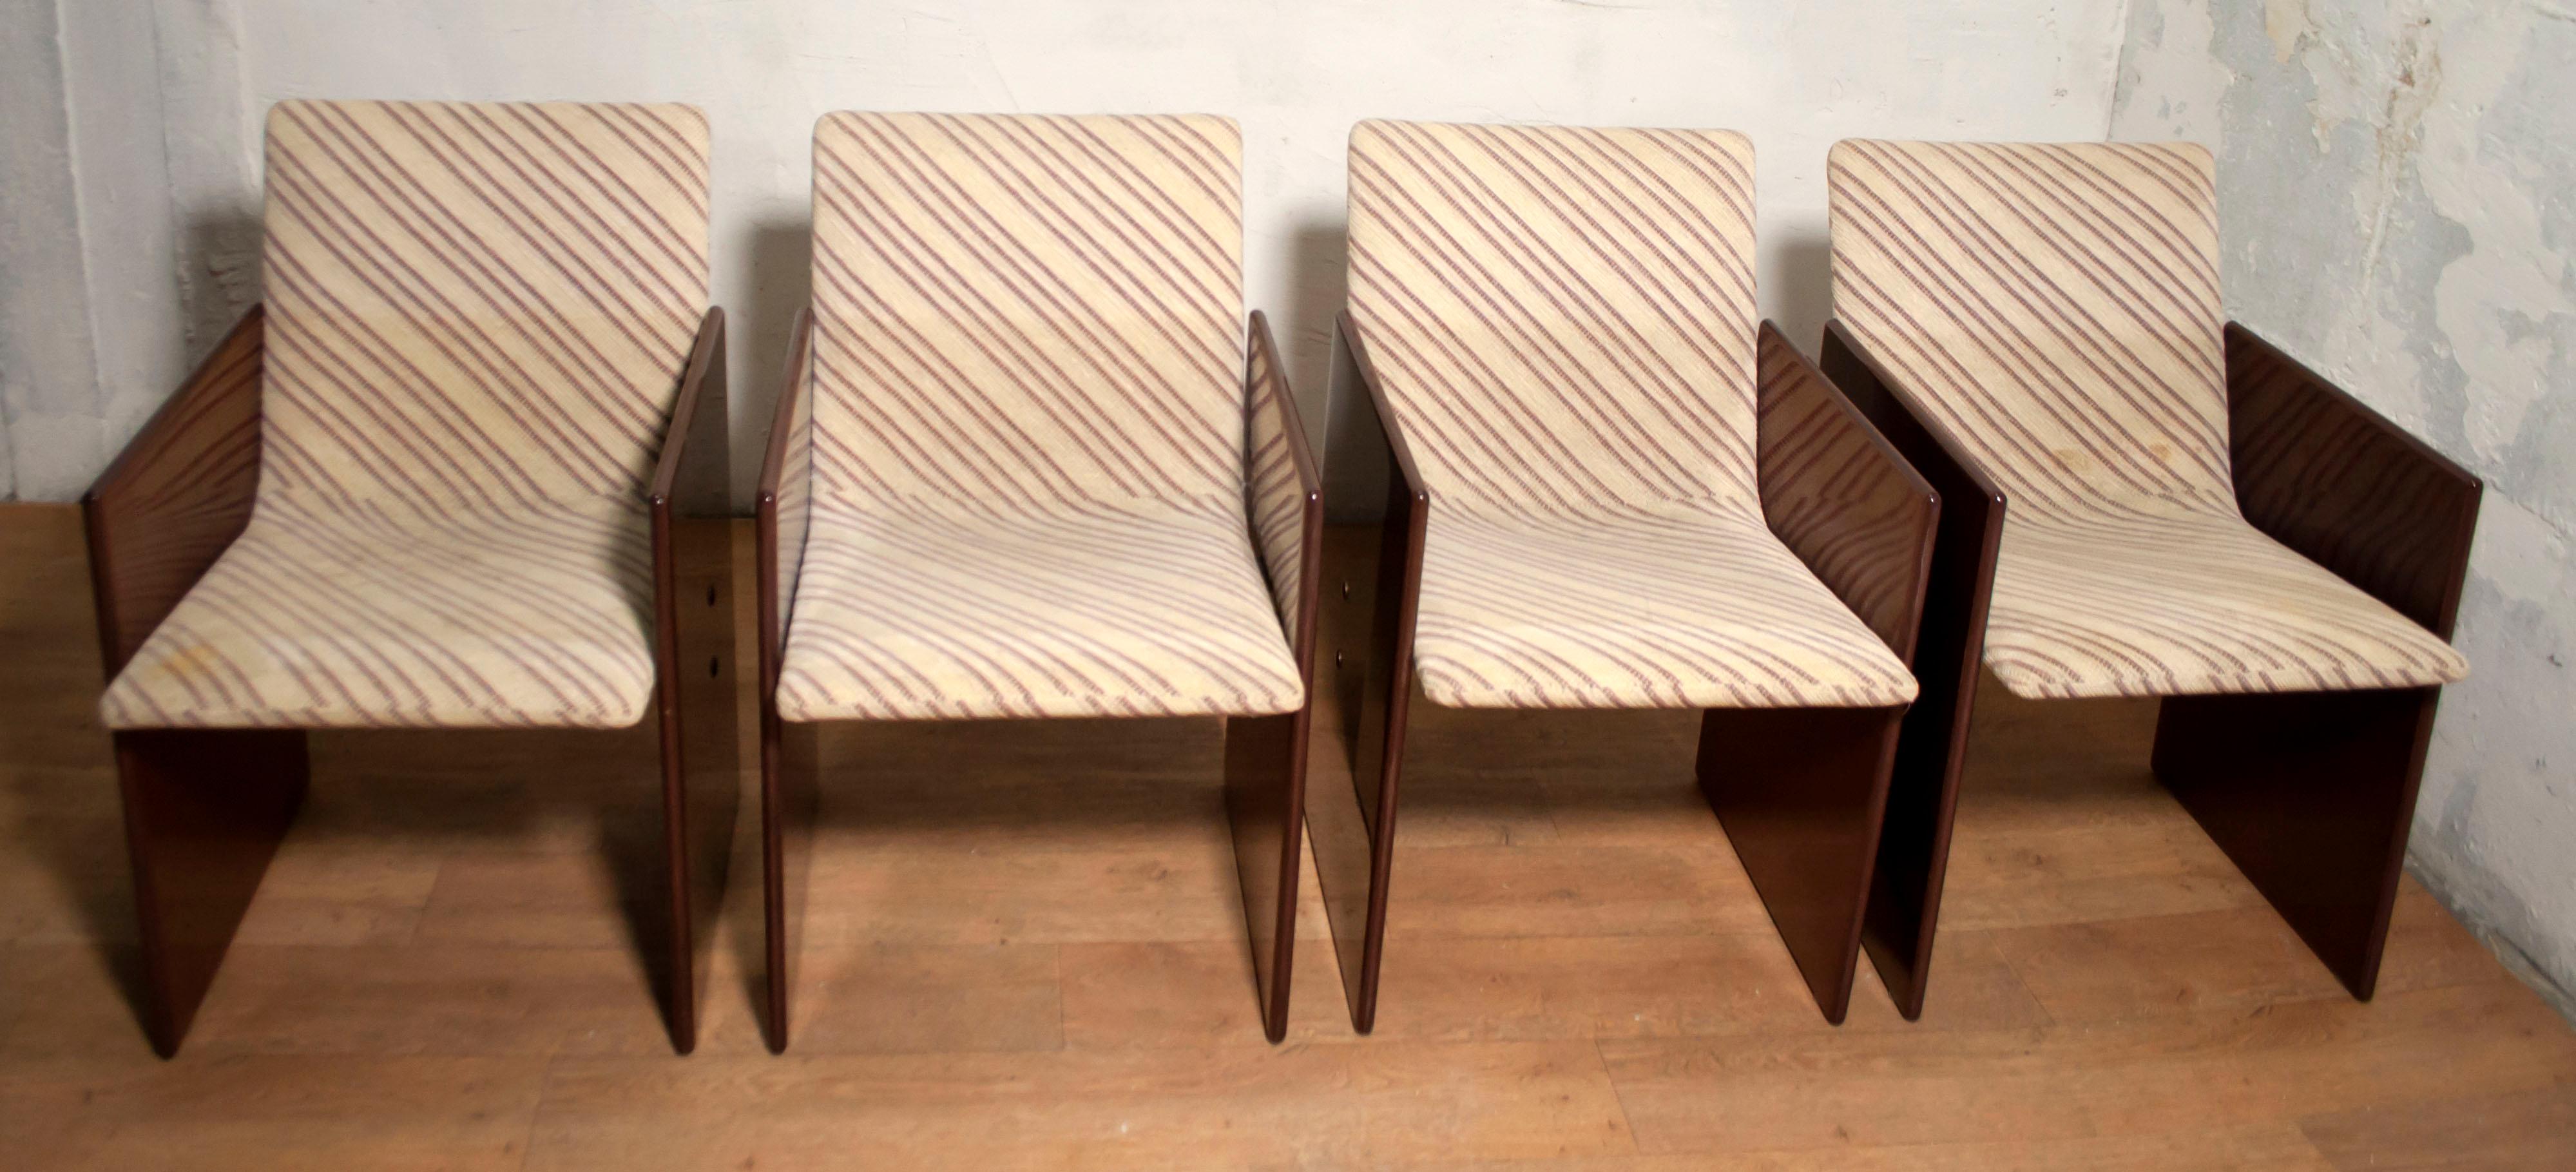 These vintage chairs from the 70s were designed by Giovannioffredi for Saporiti Italia, and are made of maple burl, the upholstery is in Missoni fabric but it is damaged, a new upholstery is recommended.

The 1970s and 1980s
Saporiti Italia begins a